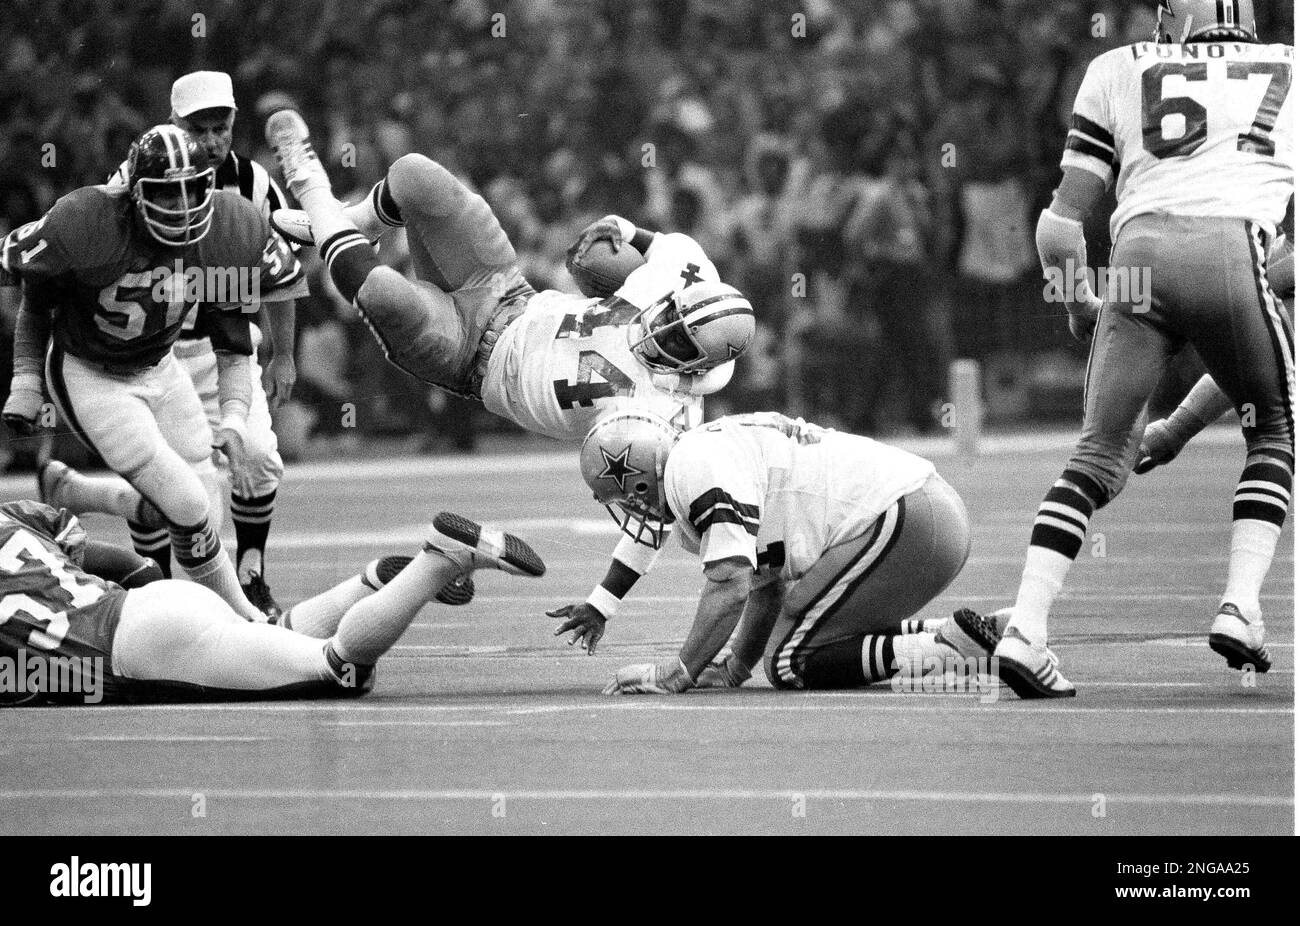 Dallas running back Robert Newhouse (44) is tripped up after a